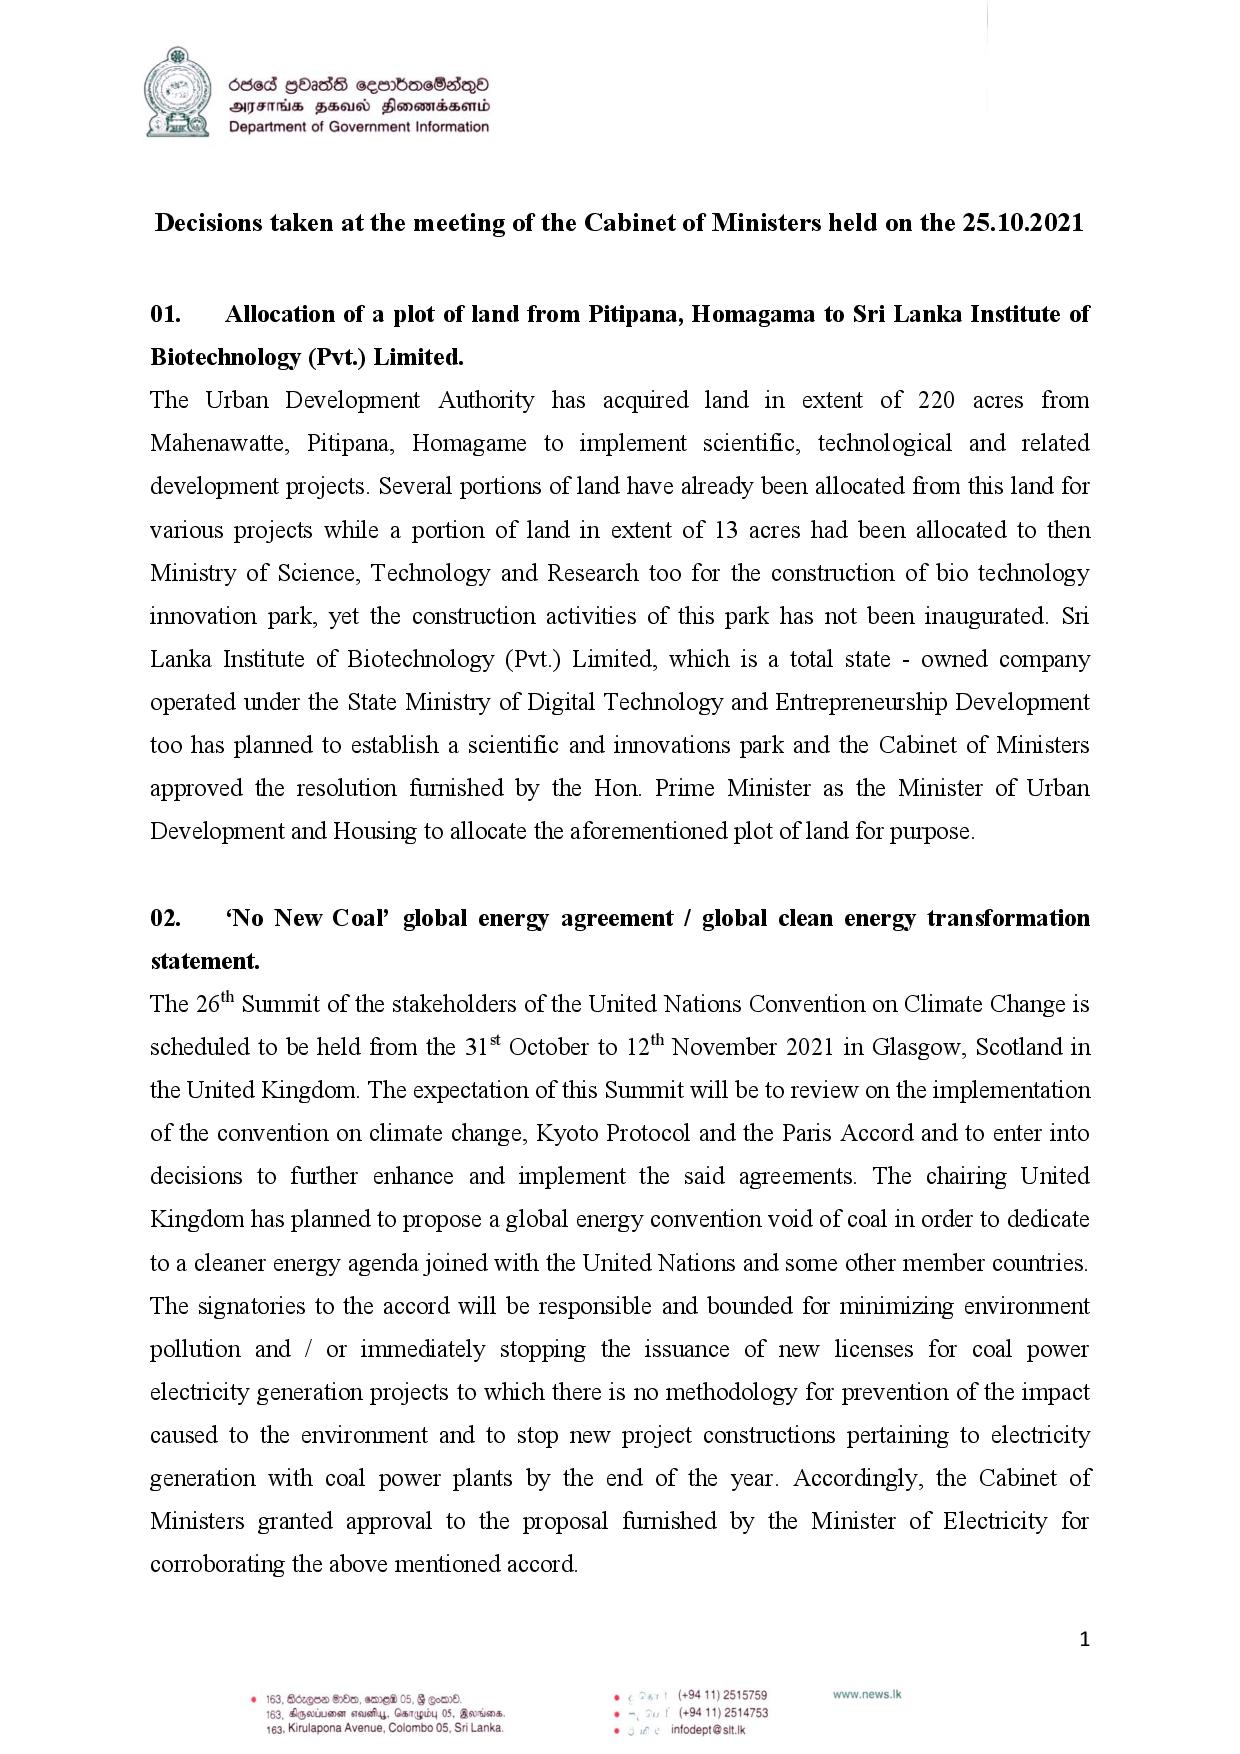 Cabinet Decisions on 25.10.2021 E page 001